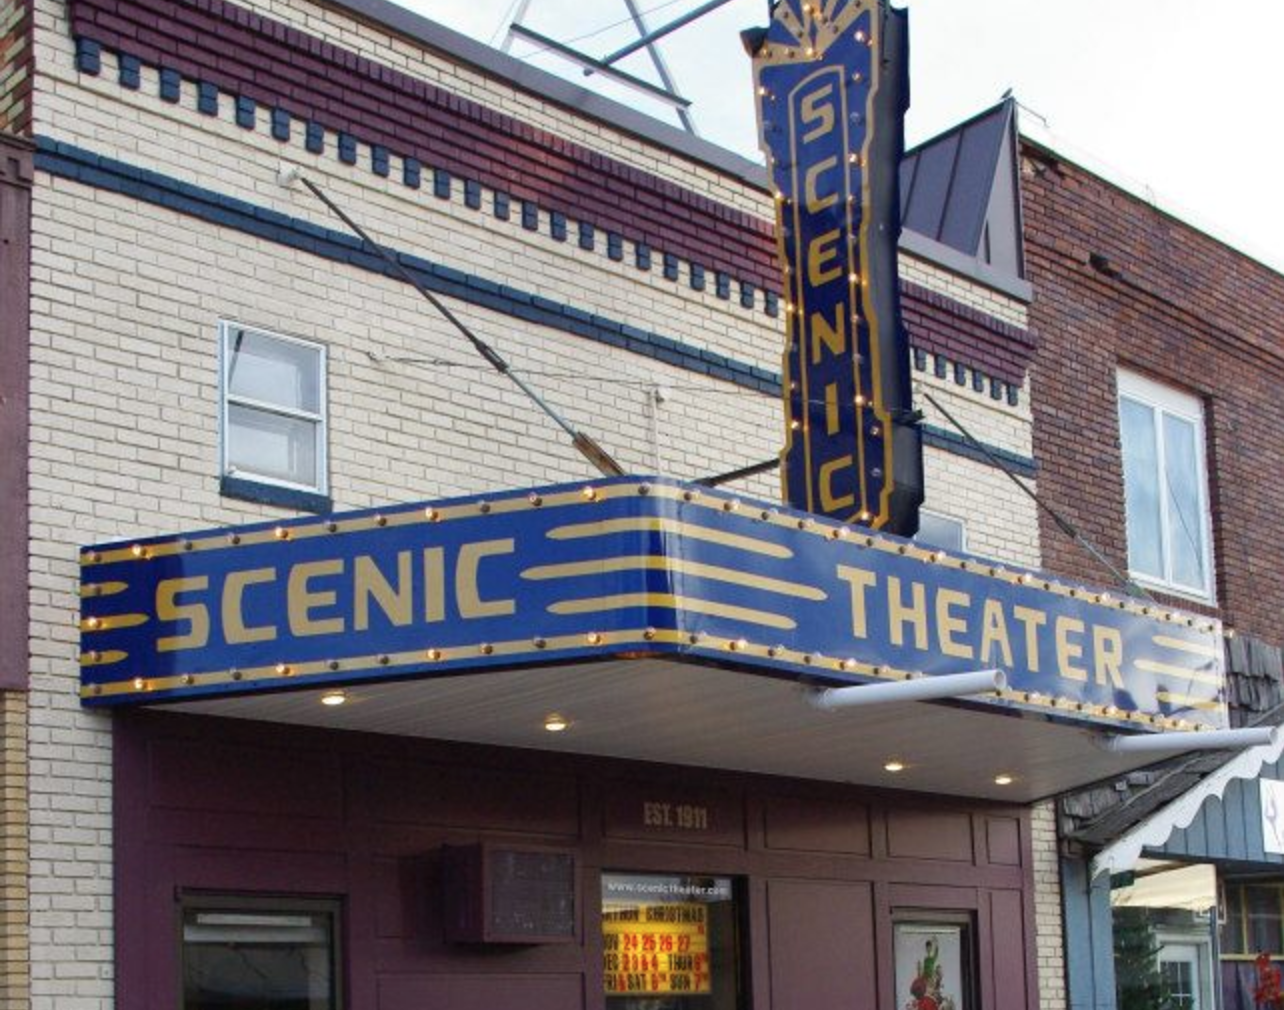 The Scenic Theater: The Oldest, Longest Running Movie Theater In